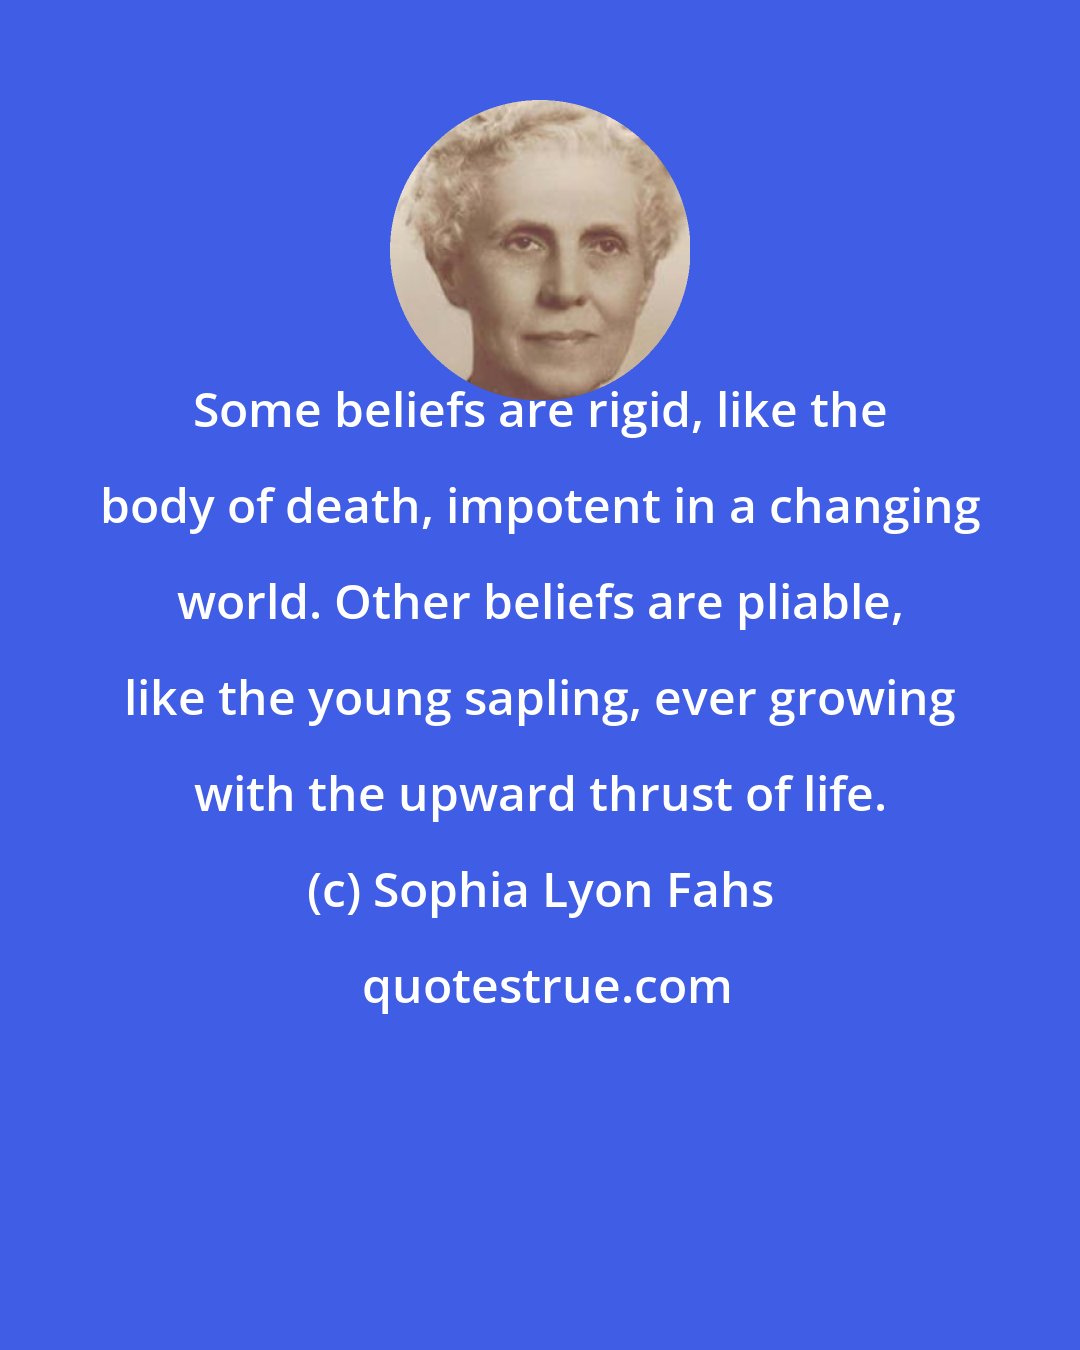 Sophia Lyon Fahs: Some beliefs are rigid, like the body of death, impotent in a changing world. Other beliefs are pliable, like the young sapling, ever growing with the upward thrust of life.